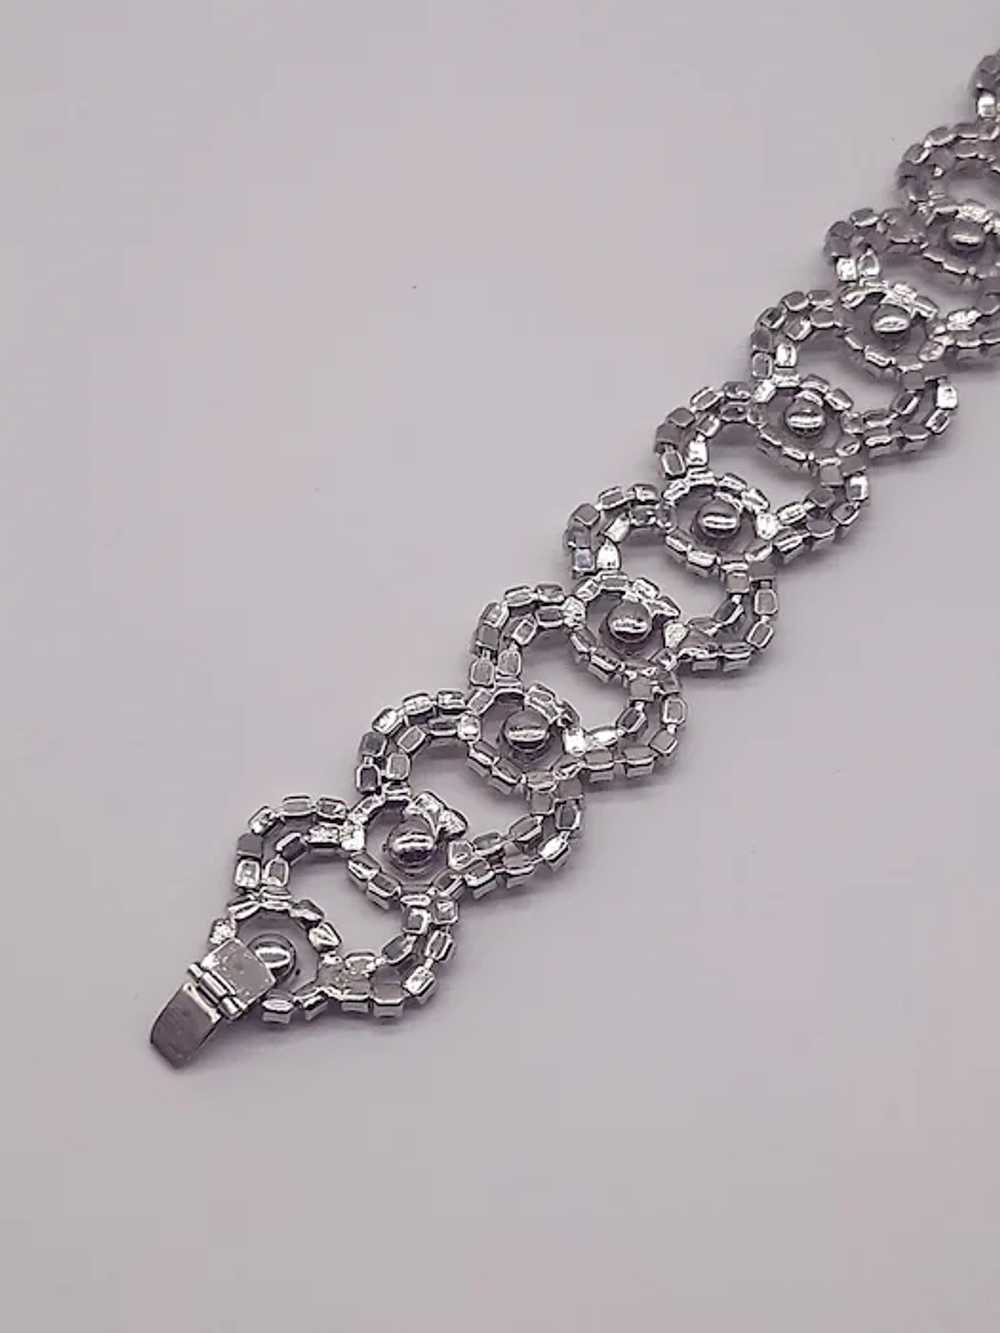 Vintage clear silver tone chocker necklace - image 7